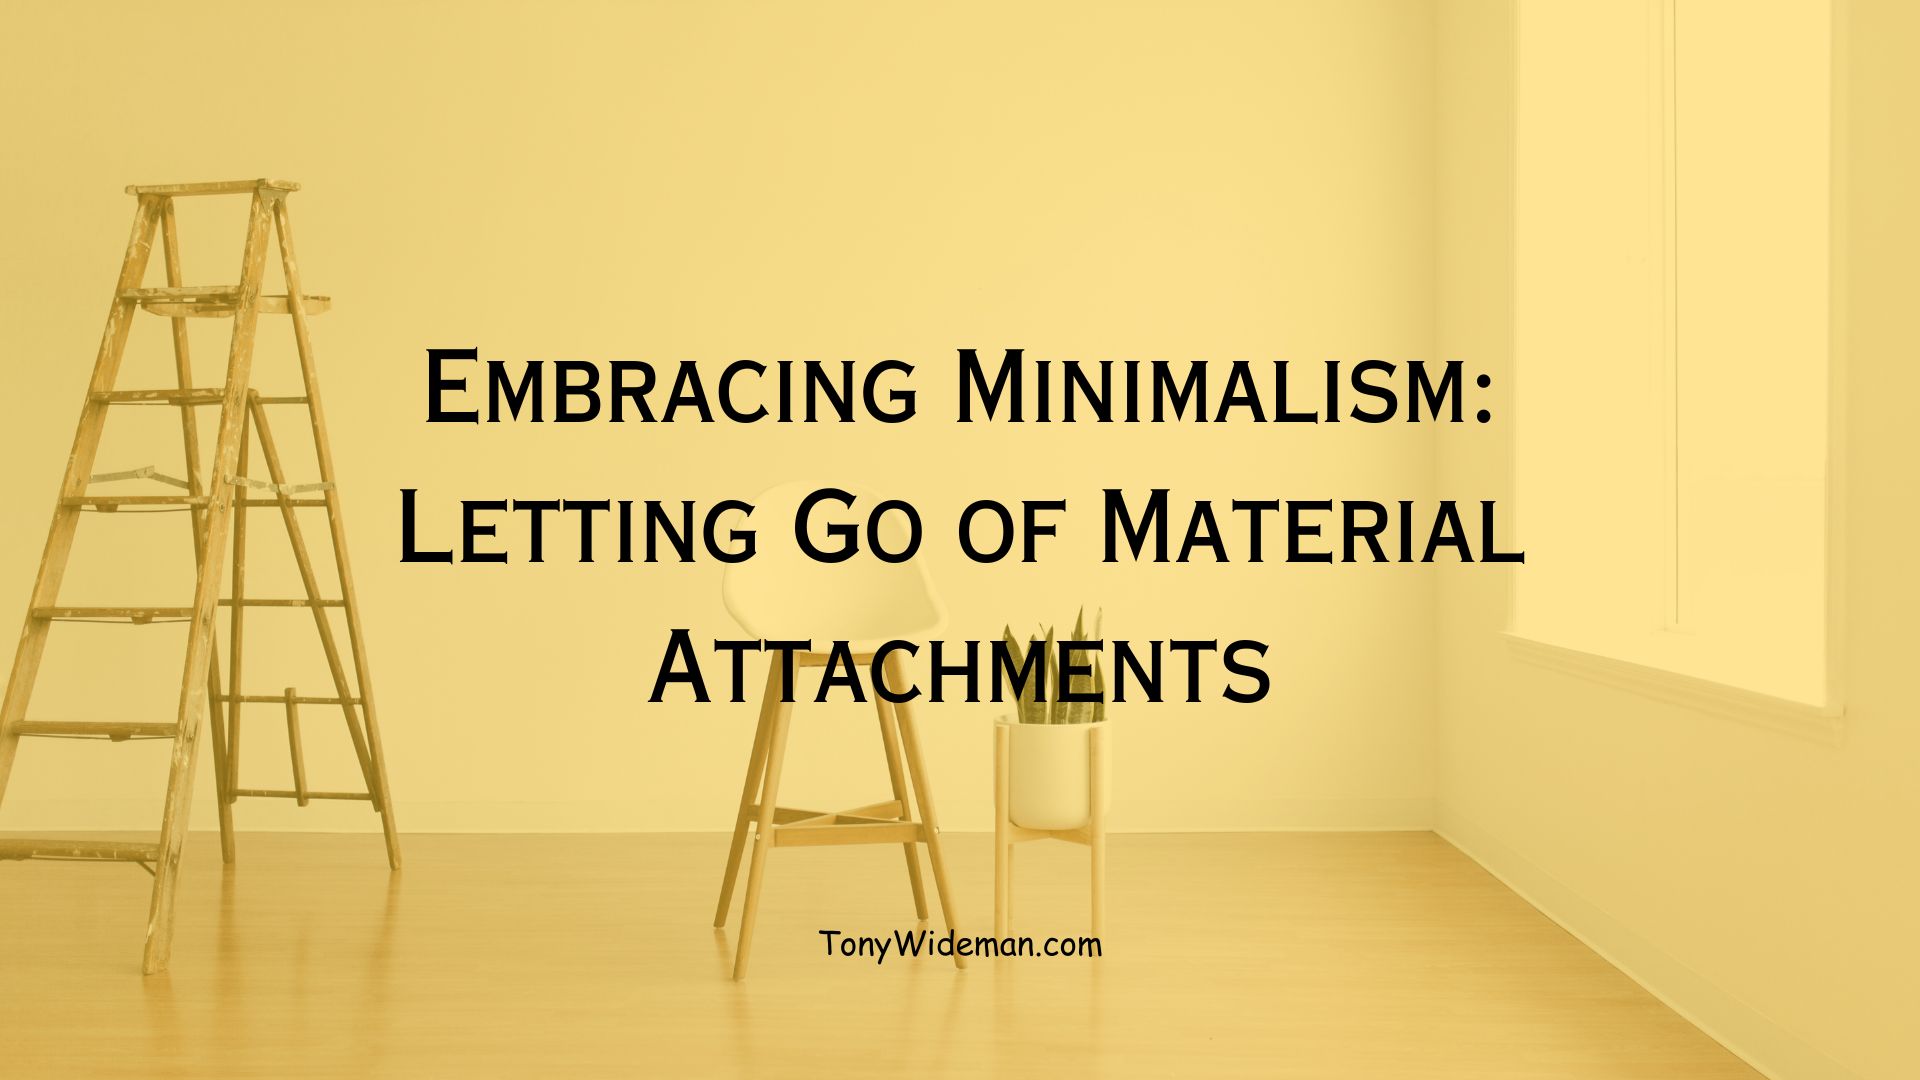 Embracing Minimalism: Letting Go of Material Attachments